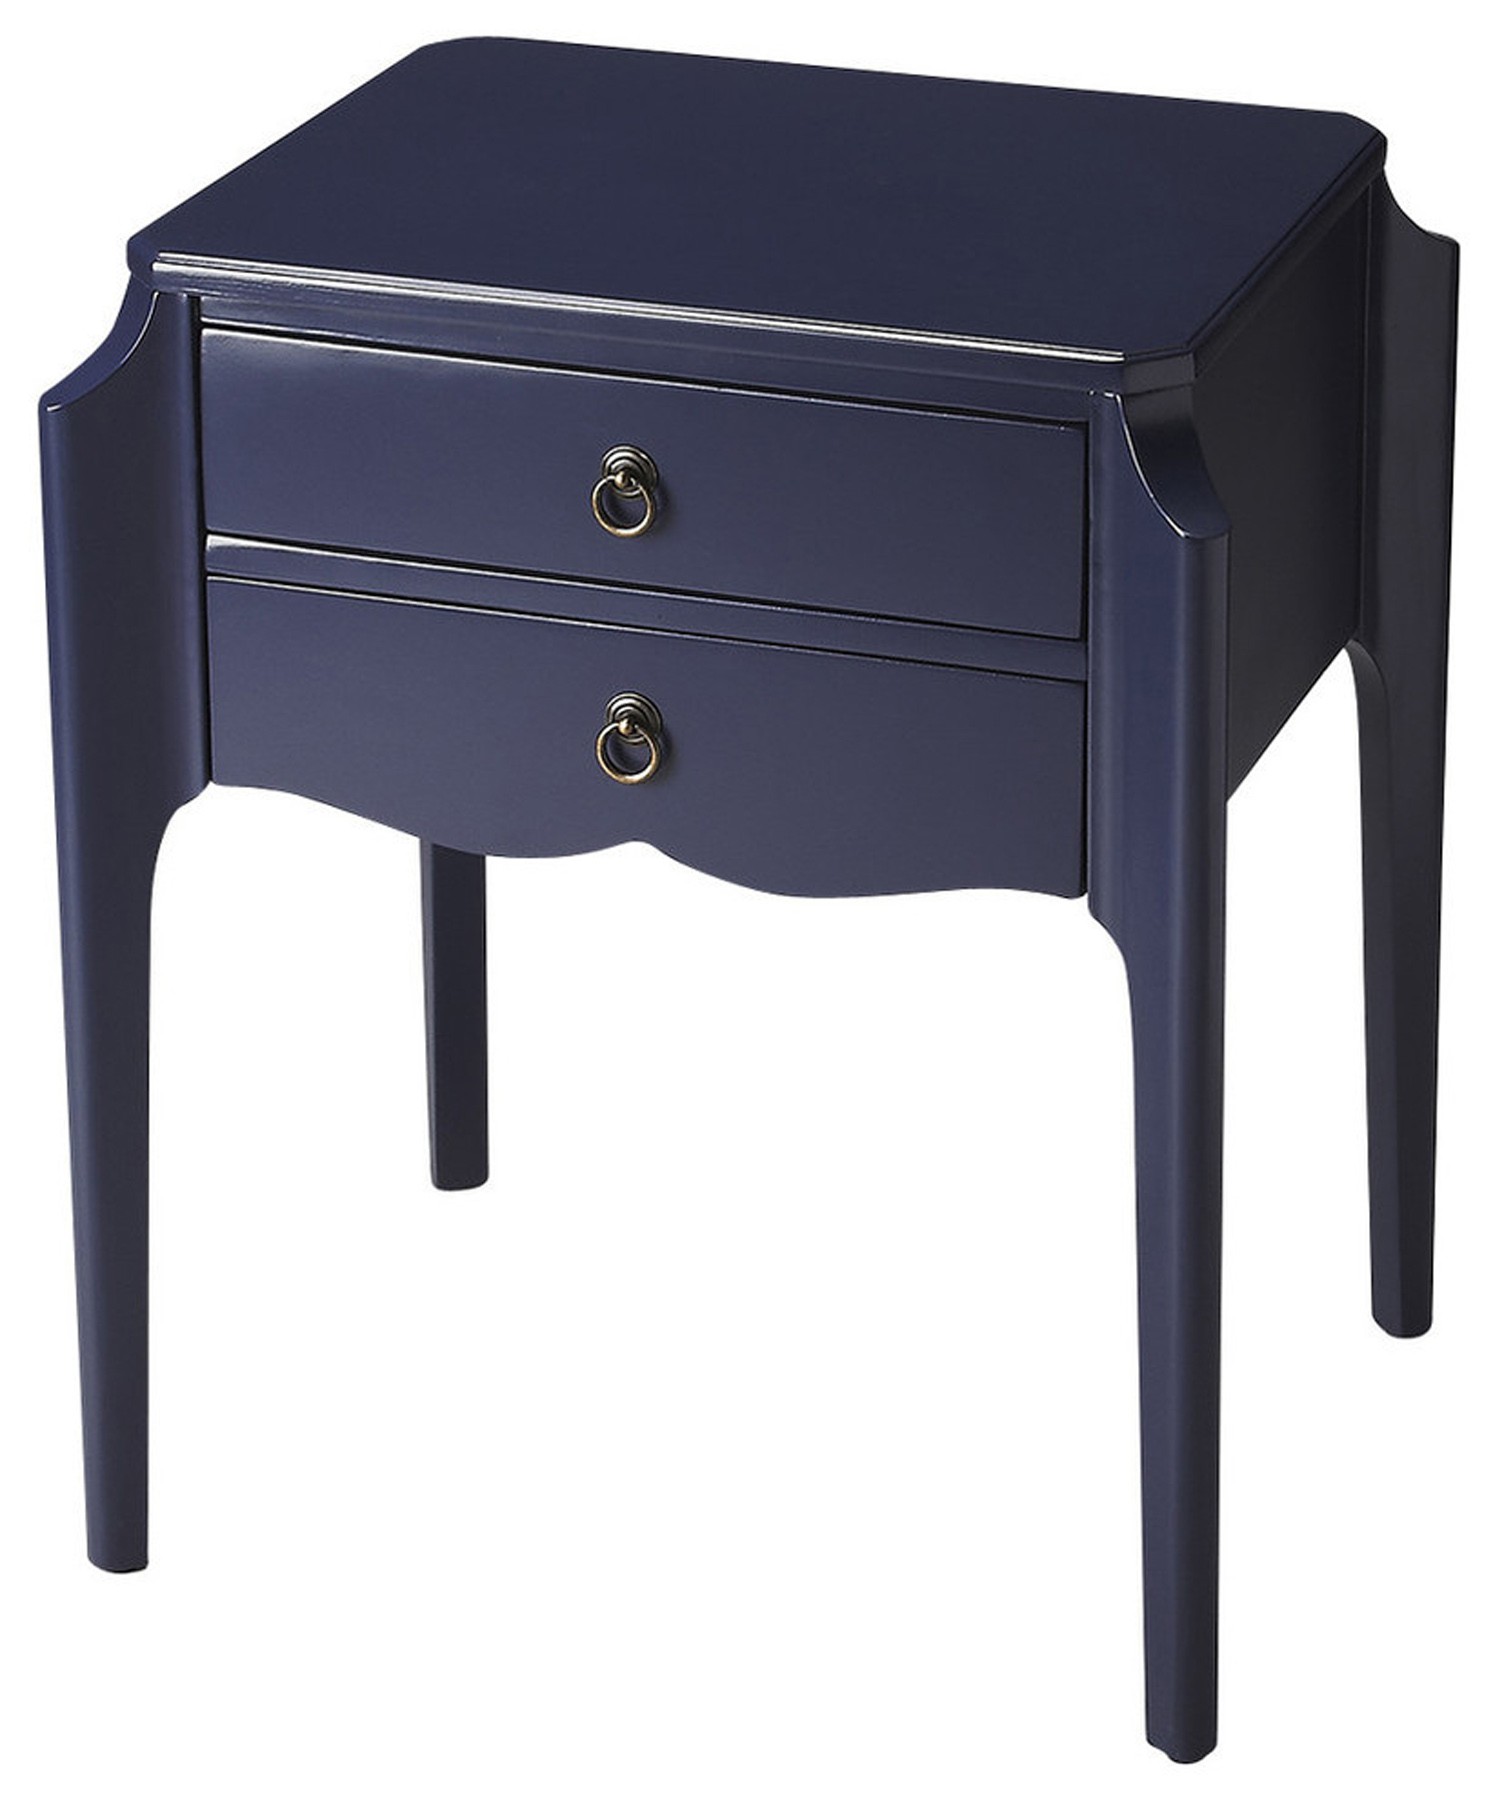 butler specialty navy blue wilshire two drawer accent shaped table tables lucite pieces for family room safavieh kennedy narrow white bedside cabinets laminate threshold trim oval